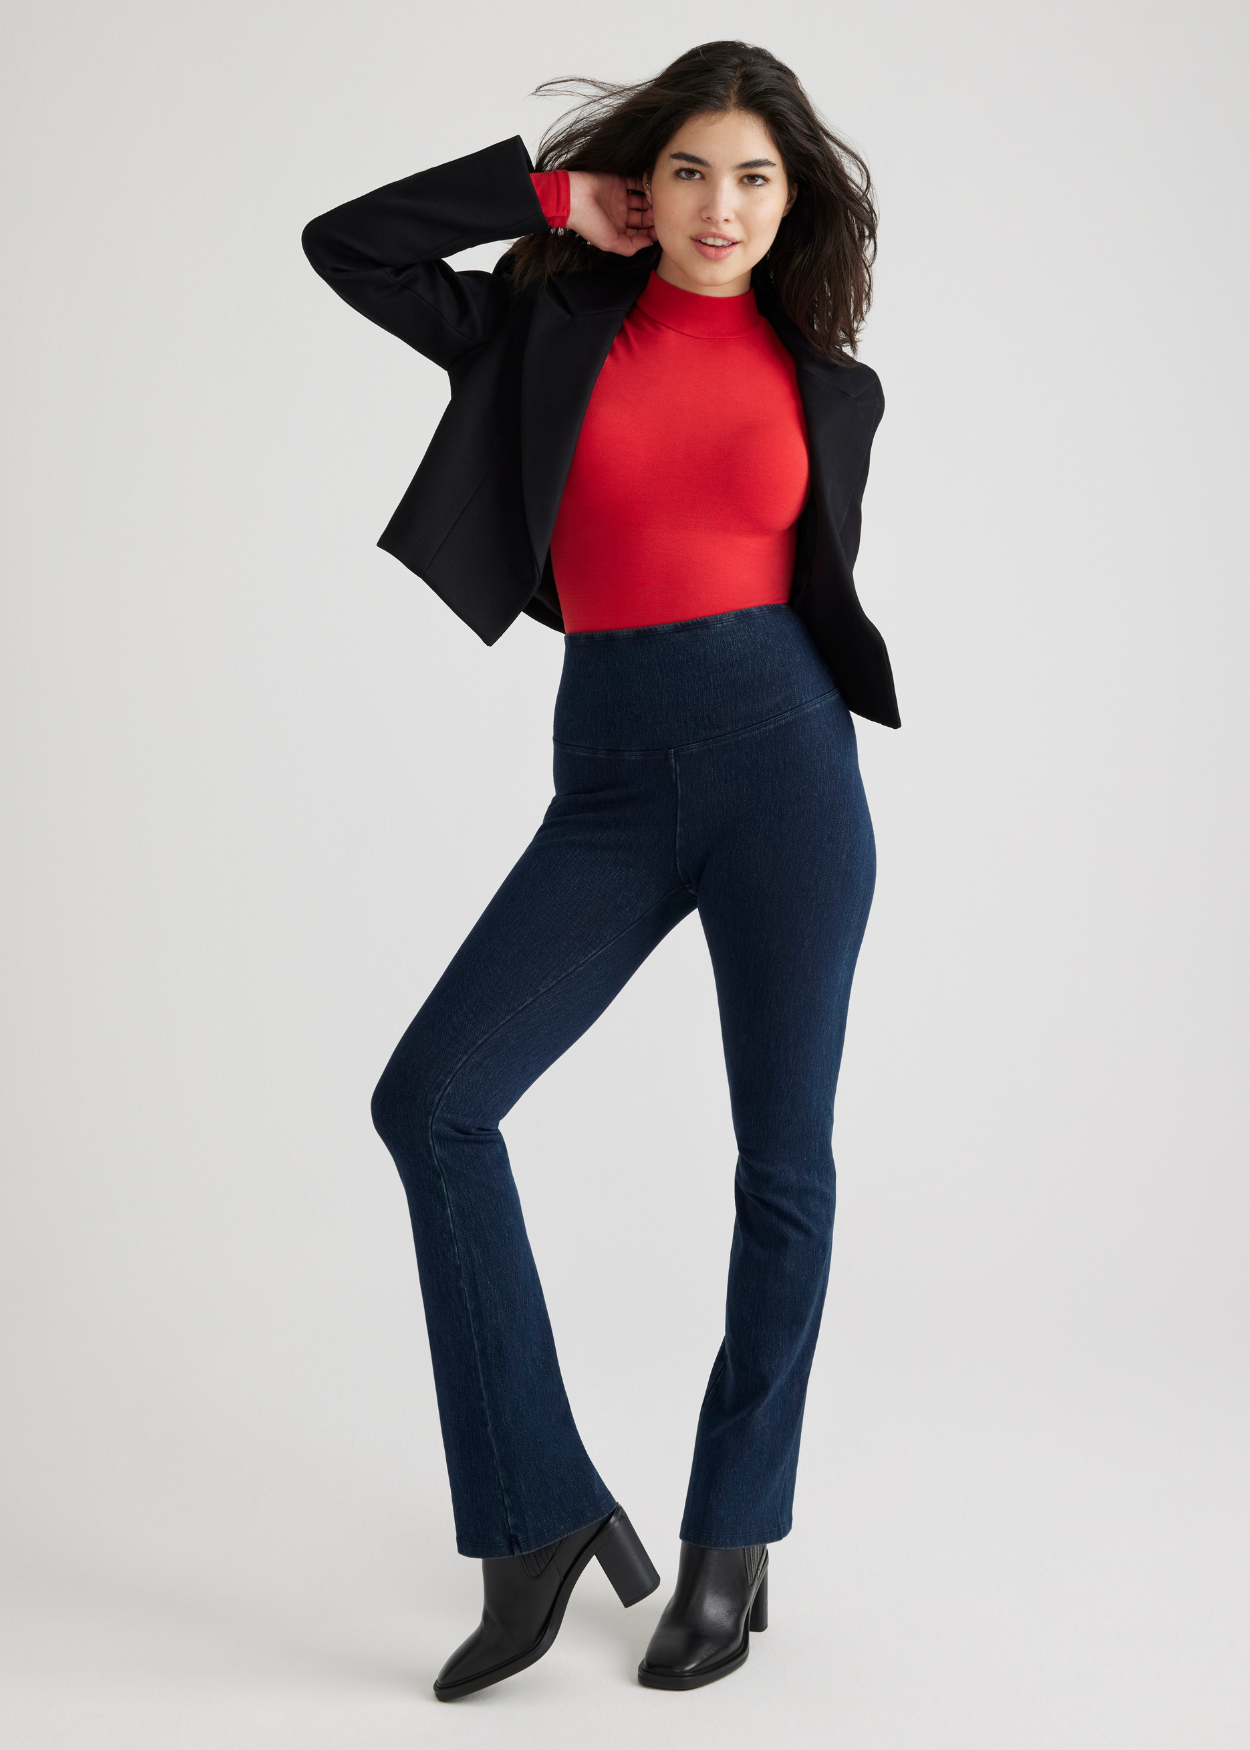 madelyn mock neck long sleeve shaping bodysuit - outlast® seamless in Salsa,  denim bootcut shaping legging in True Indigo and a black blazer worn by a woman standing facing forward with one hand at neck and the other behind her back Yummie